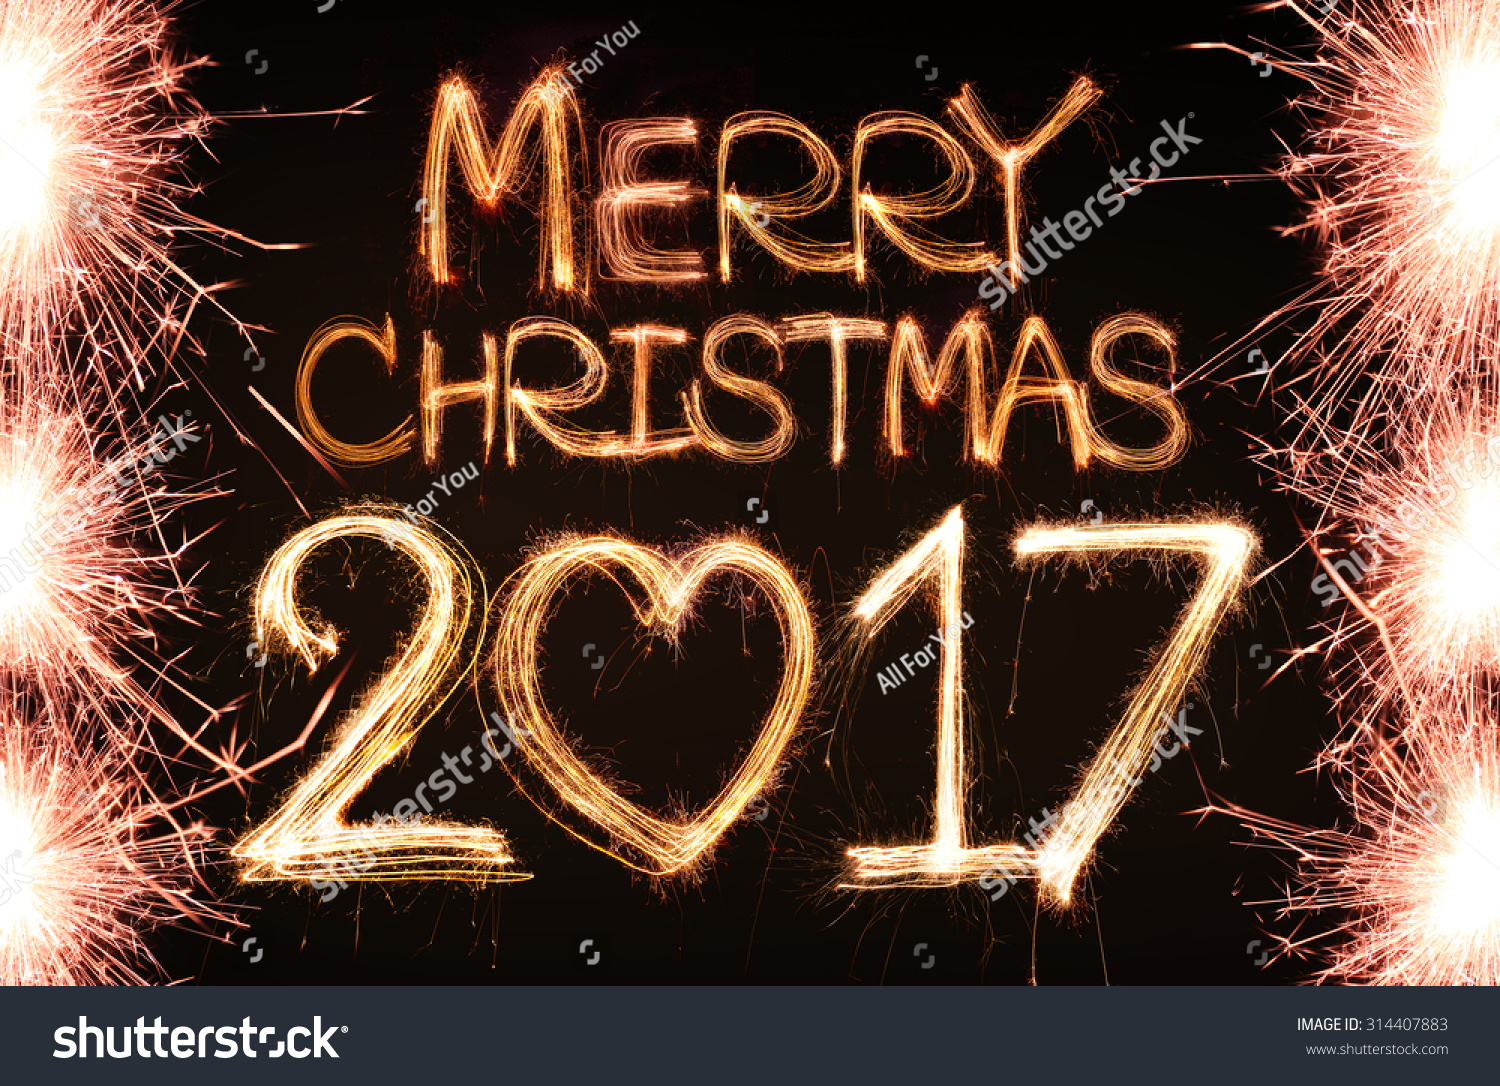 Image result for merry christmas 2017